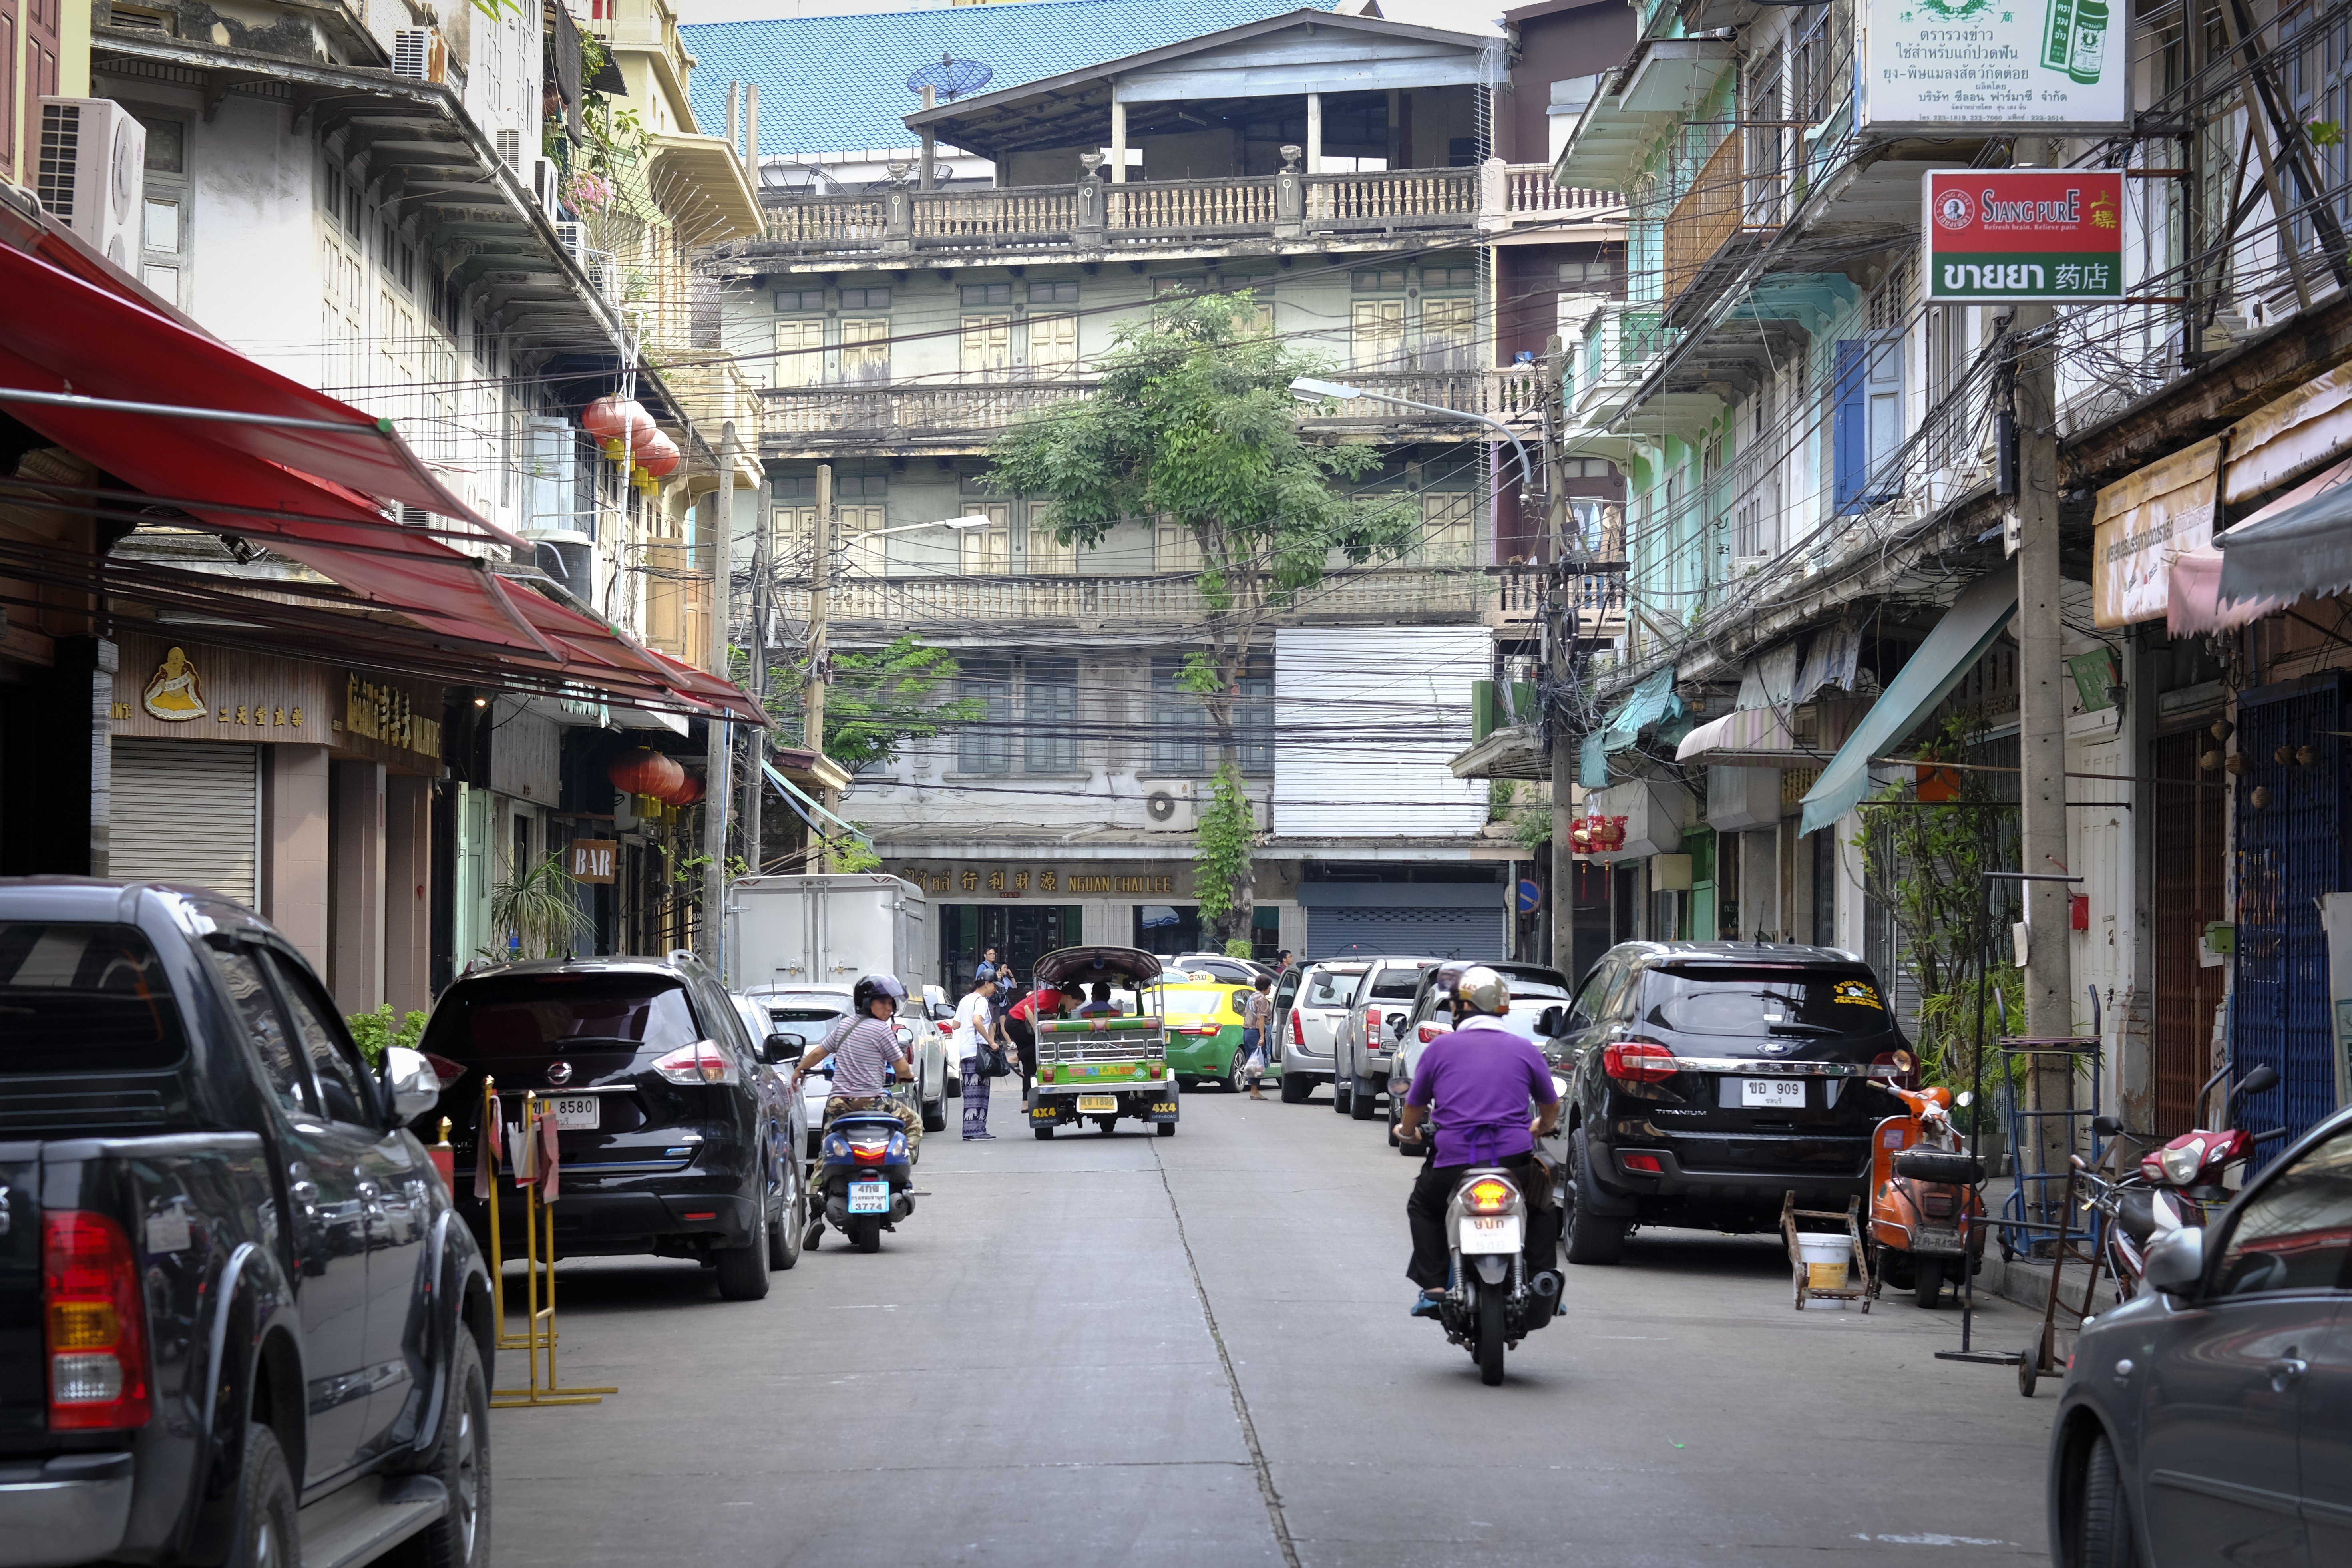 Most Sino-Thai clans quit Sampheng, a warren of narrow lanes, years ago, but few sold their properties, and its patchwork of ownership may save the historic neighbourhood from mass development – though change will inevitably come